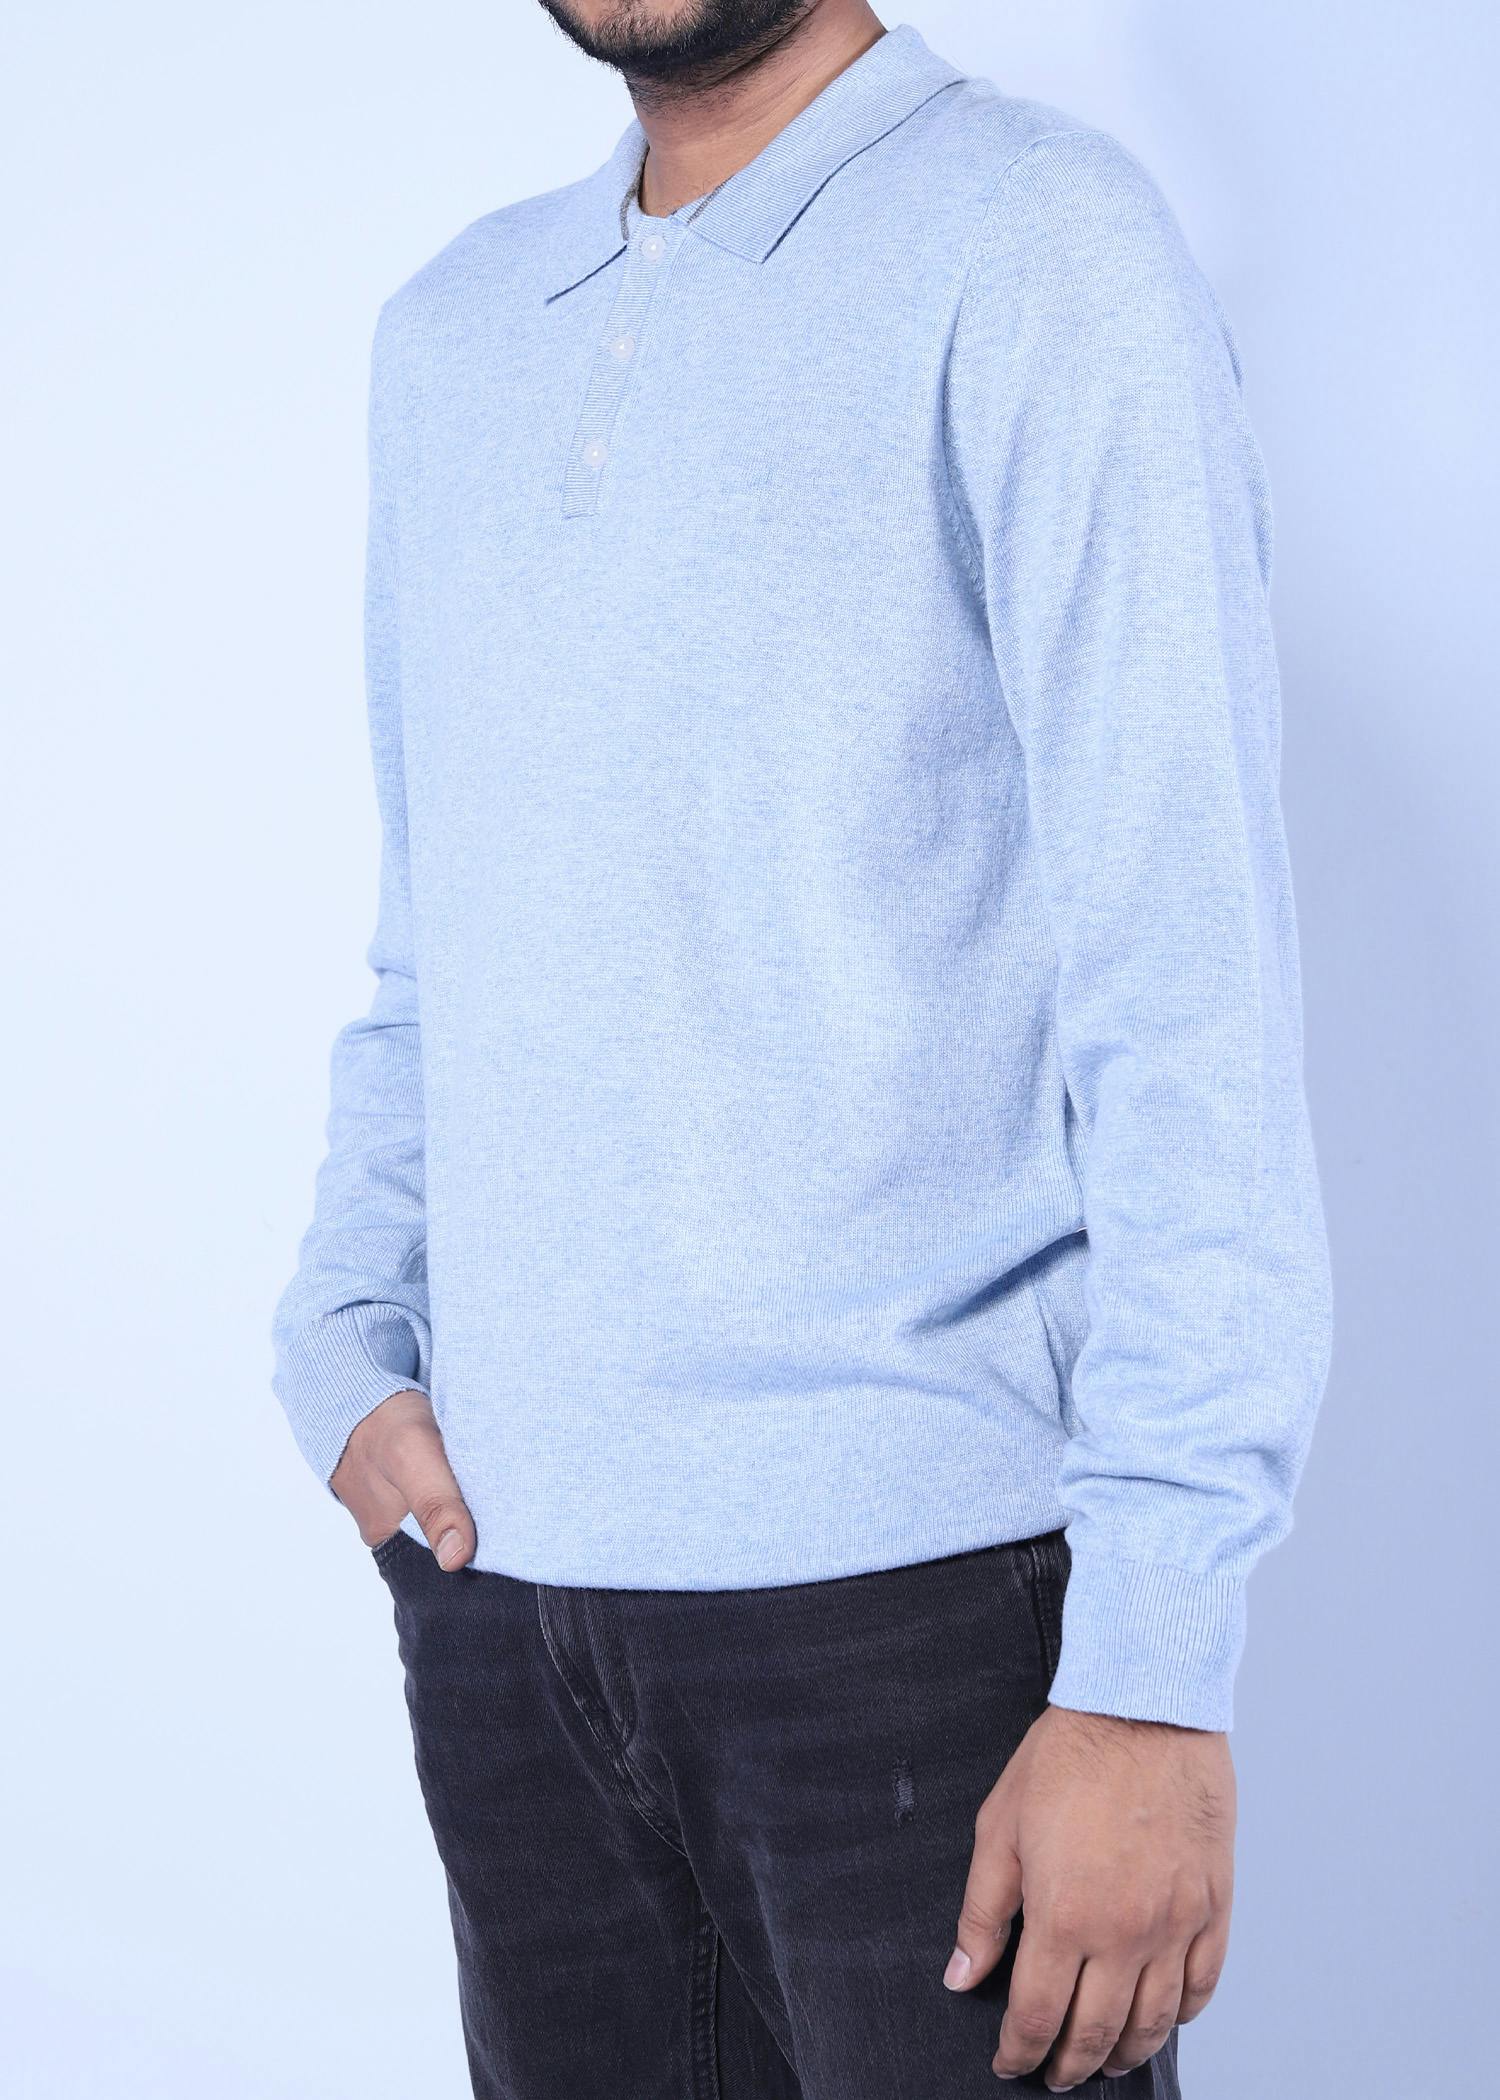 athens sweater sky blue color half side view